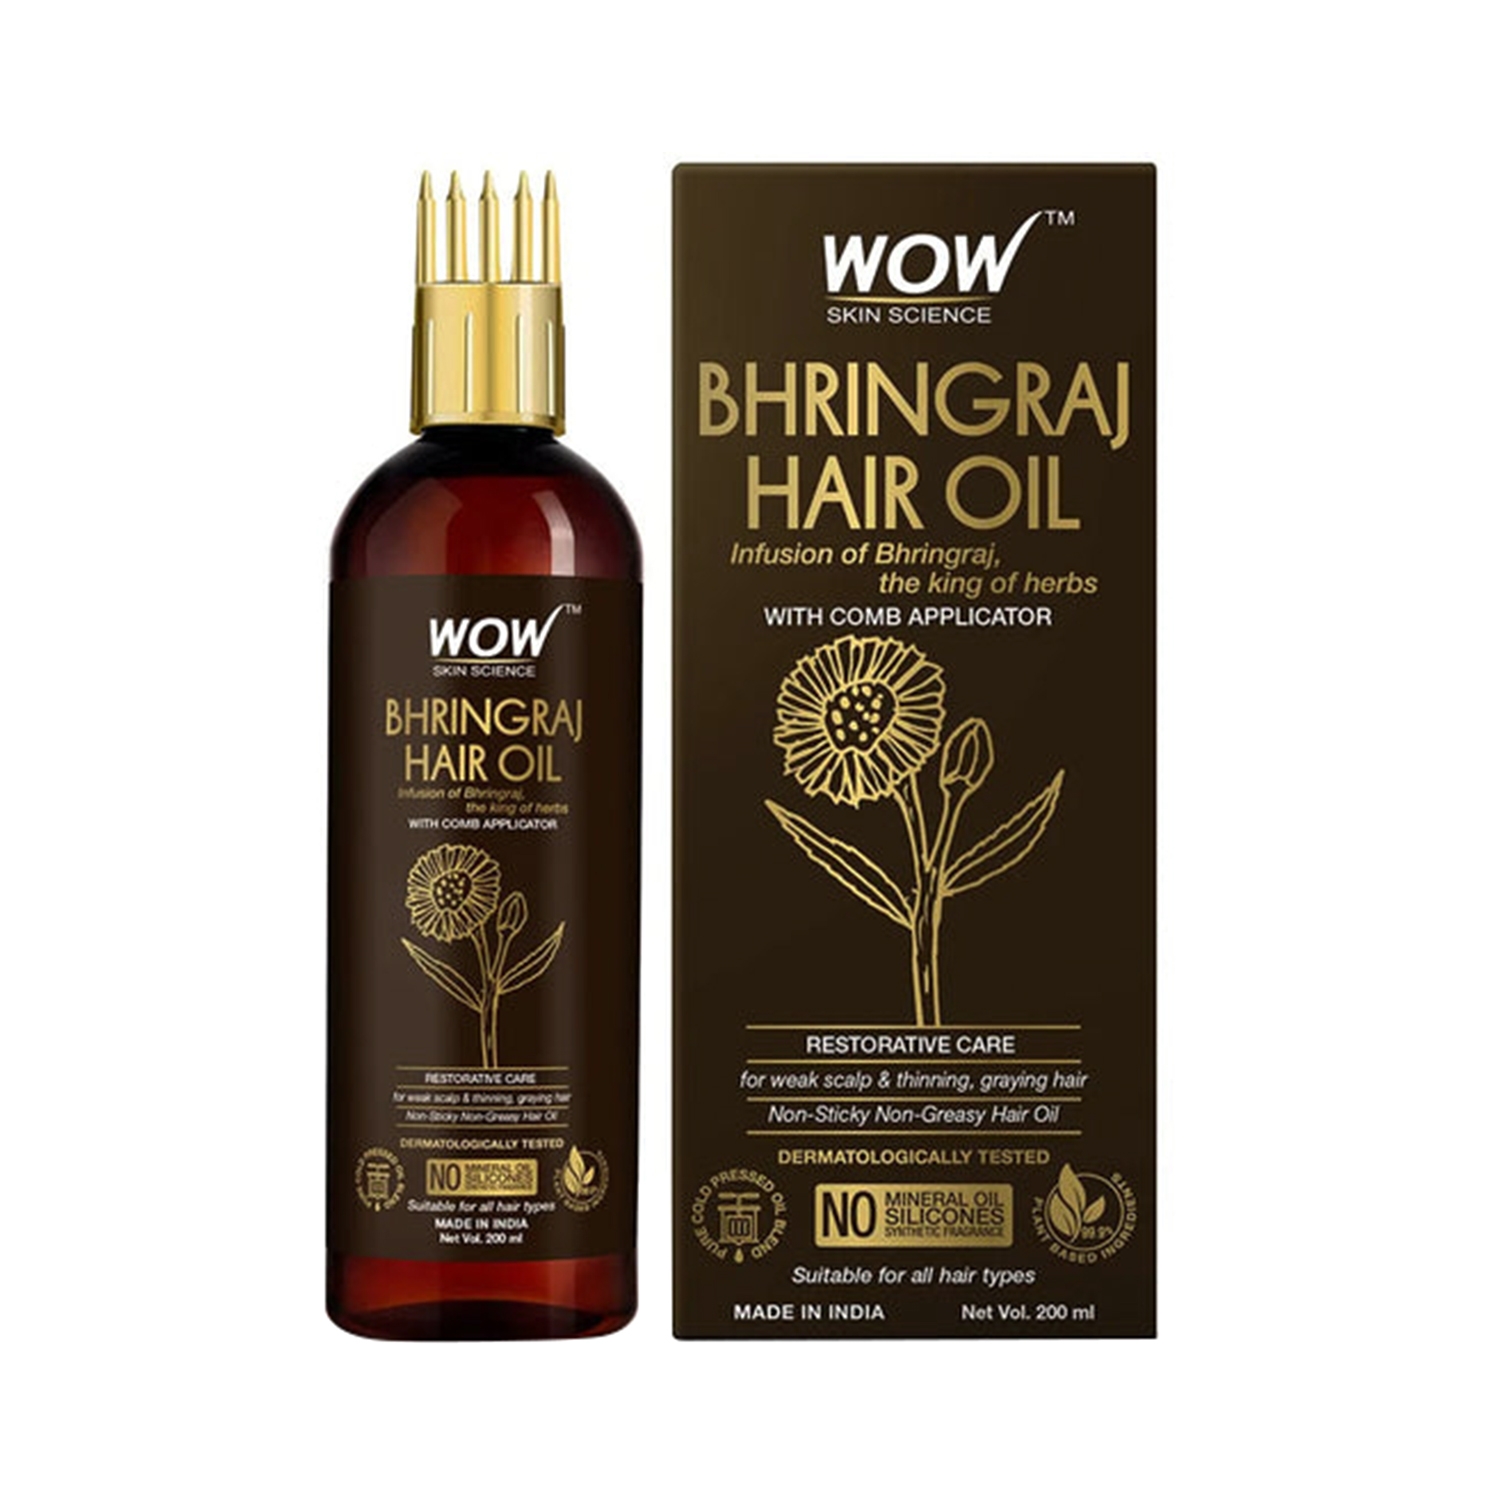 WOW SKIN SCIENCE | WOW Skin Science Bhringraj Hair Oil With Comb Applicator (200ml)